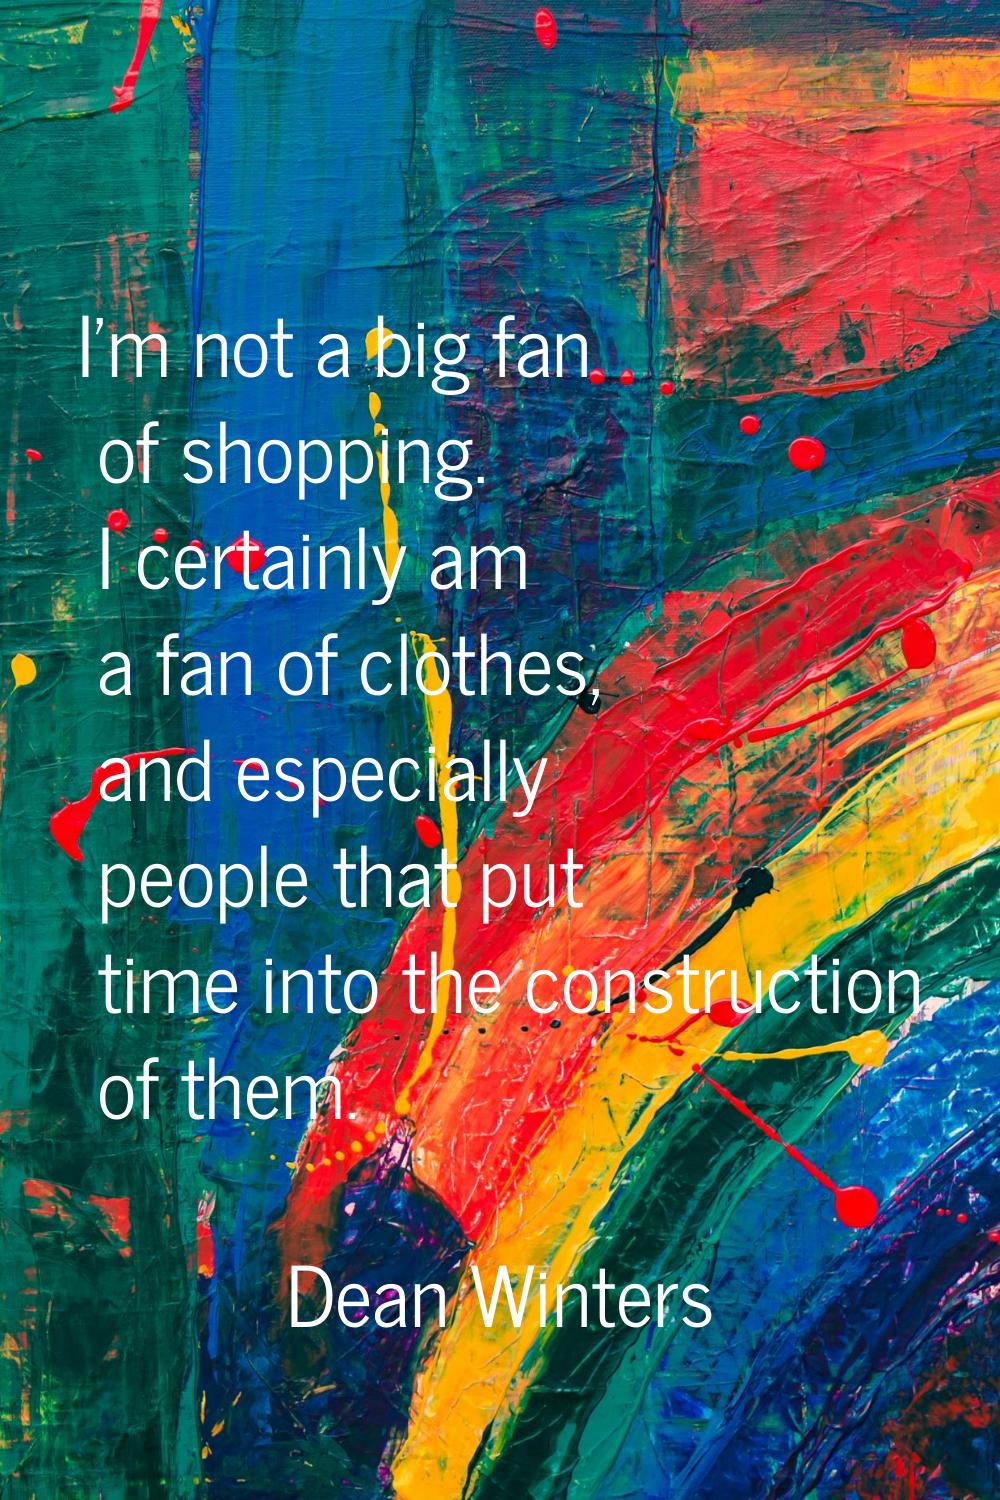 I'm not a big fan of shopping. I certainly am a fan of clothes, and especially people that put time